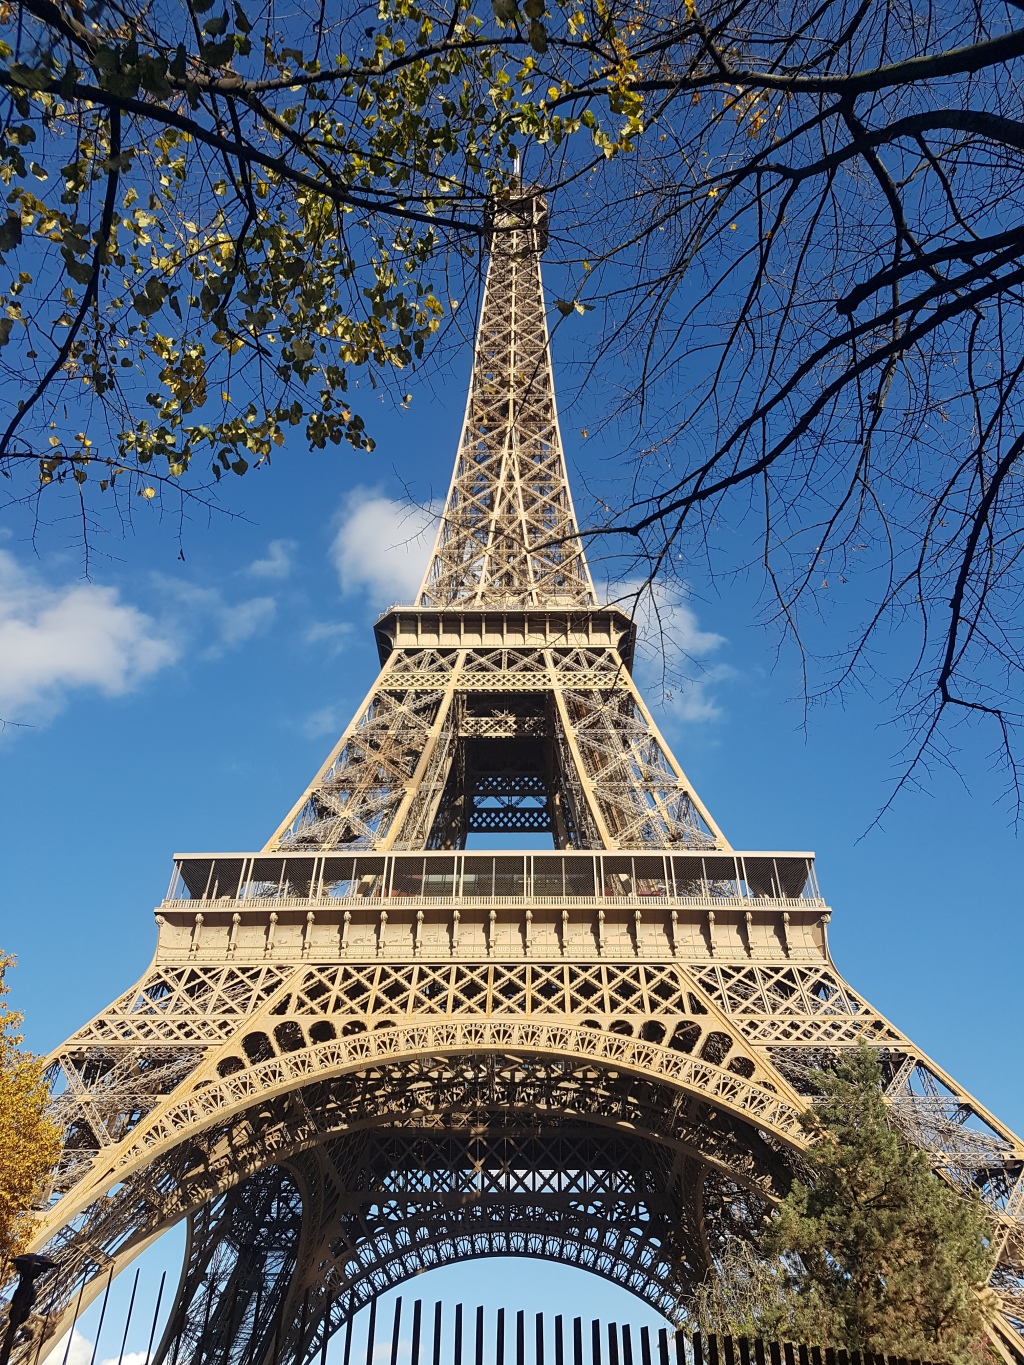 Paris: Disney, Eiffel Tower and the longest bus ride in history…